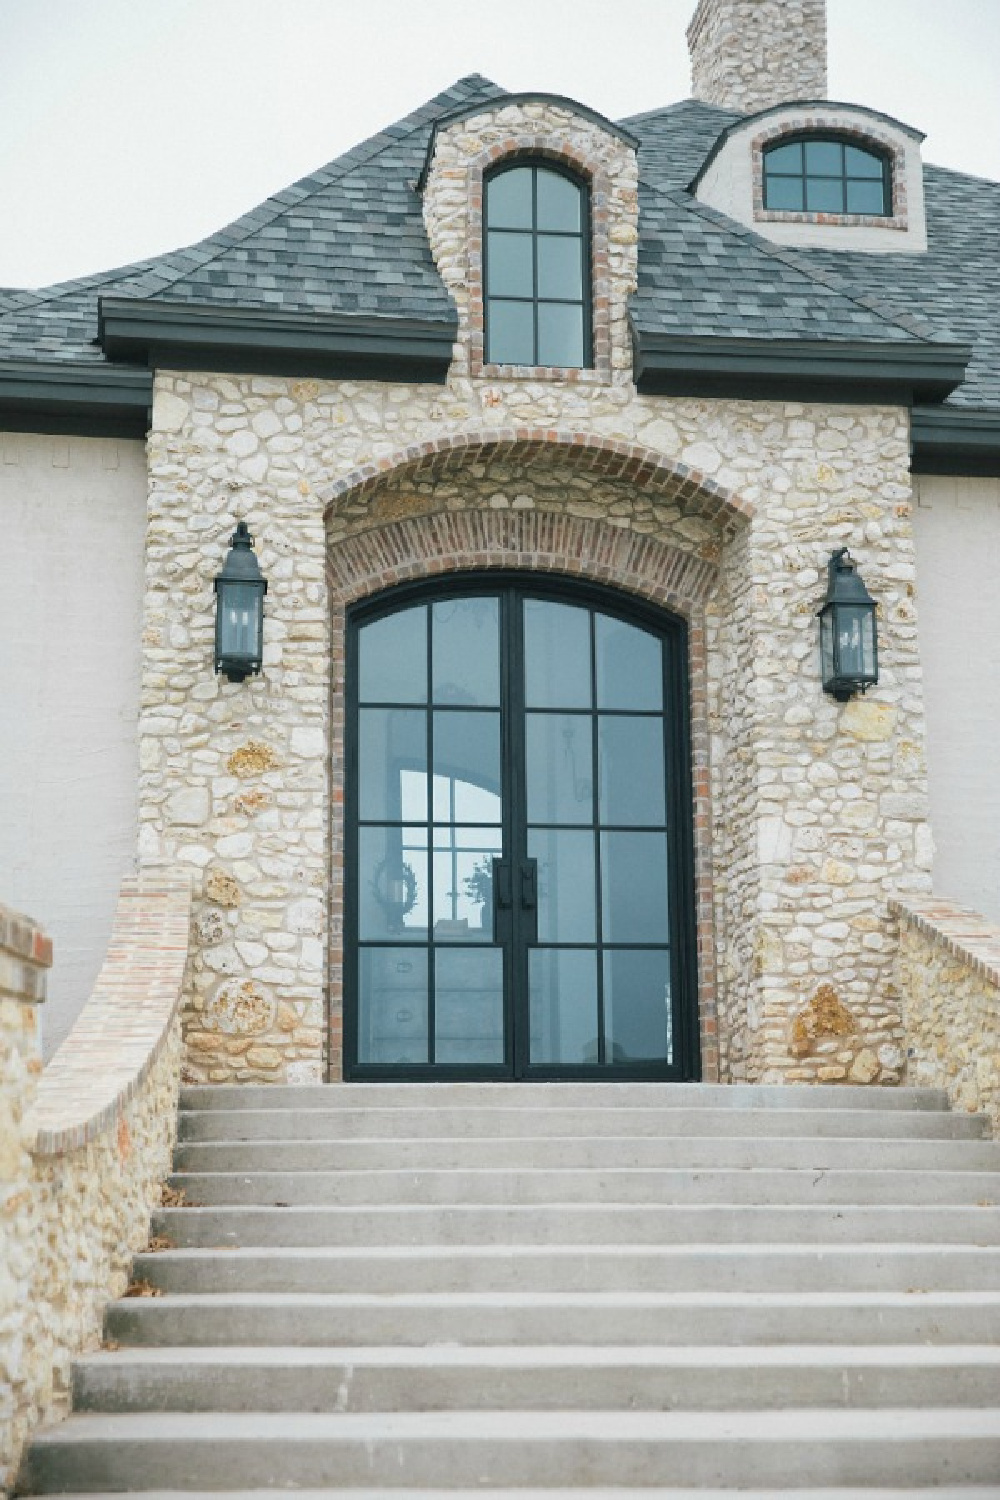 Elegant French country home esterior with steel double arch front doors, stone, brick, stucco, and rustic lanterns. Design by Brit Jones.